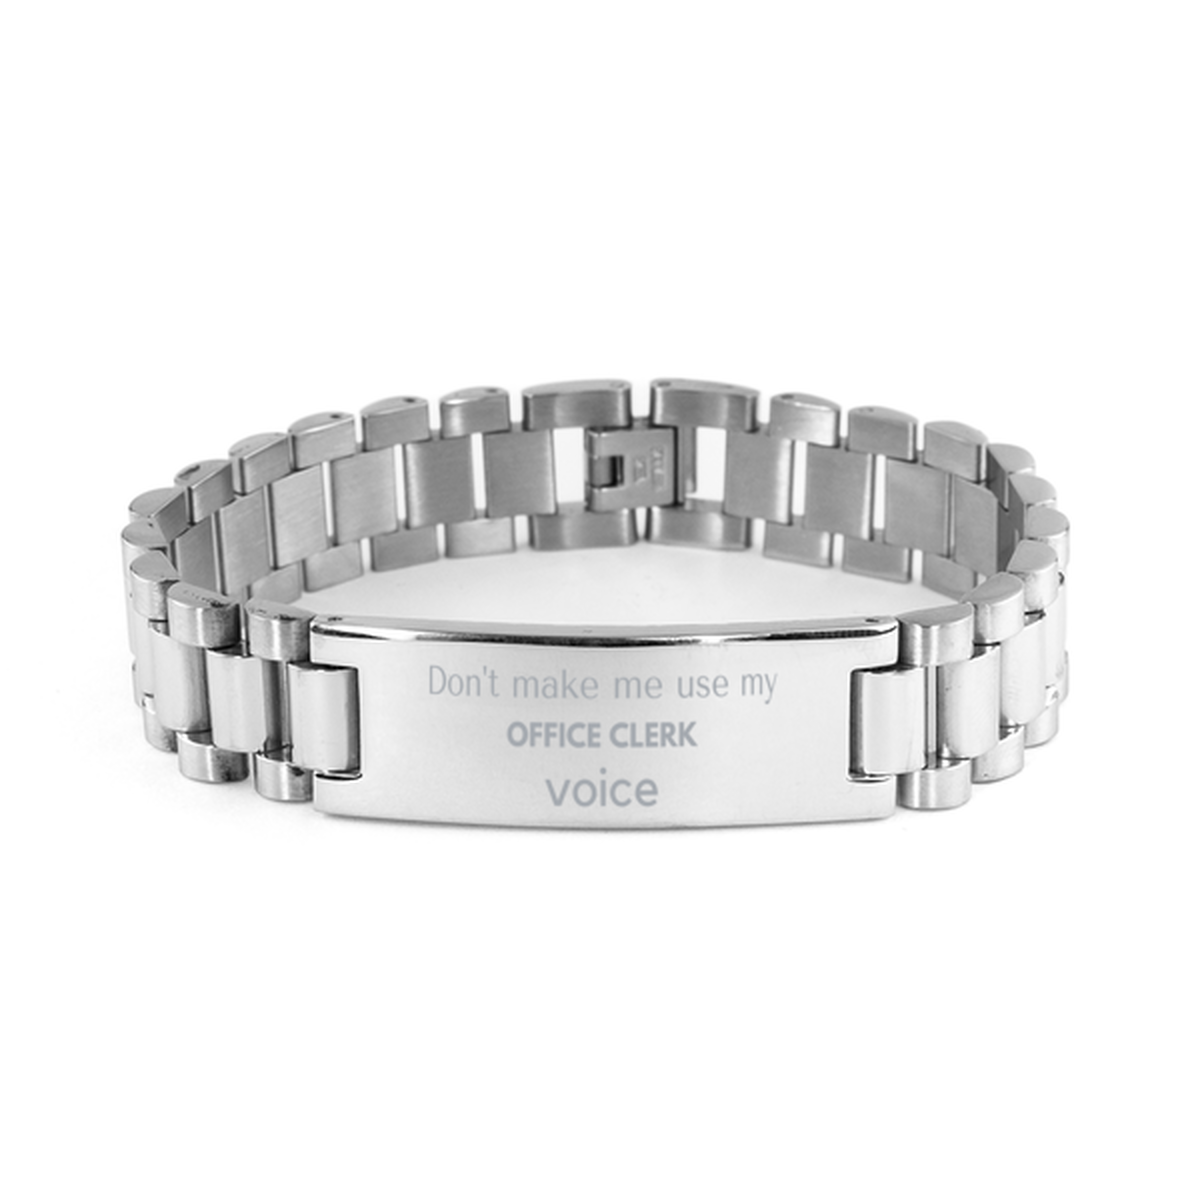 Don't make me use my Office Clerk voice, Sarcasm Office Clerk Gifts, Christmas Office Clerk Ladder Stainless Steel Bracelet Birthday Unique Gifts For Office Clerk Coworkers, Men, Women, Colleague, Friends